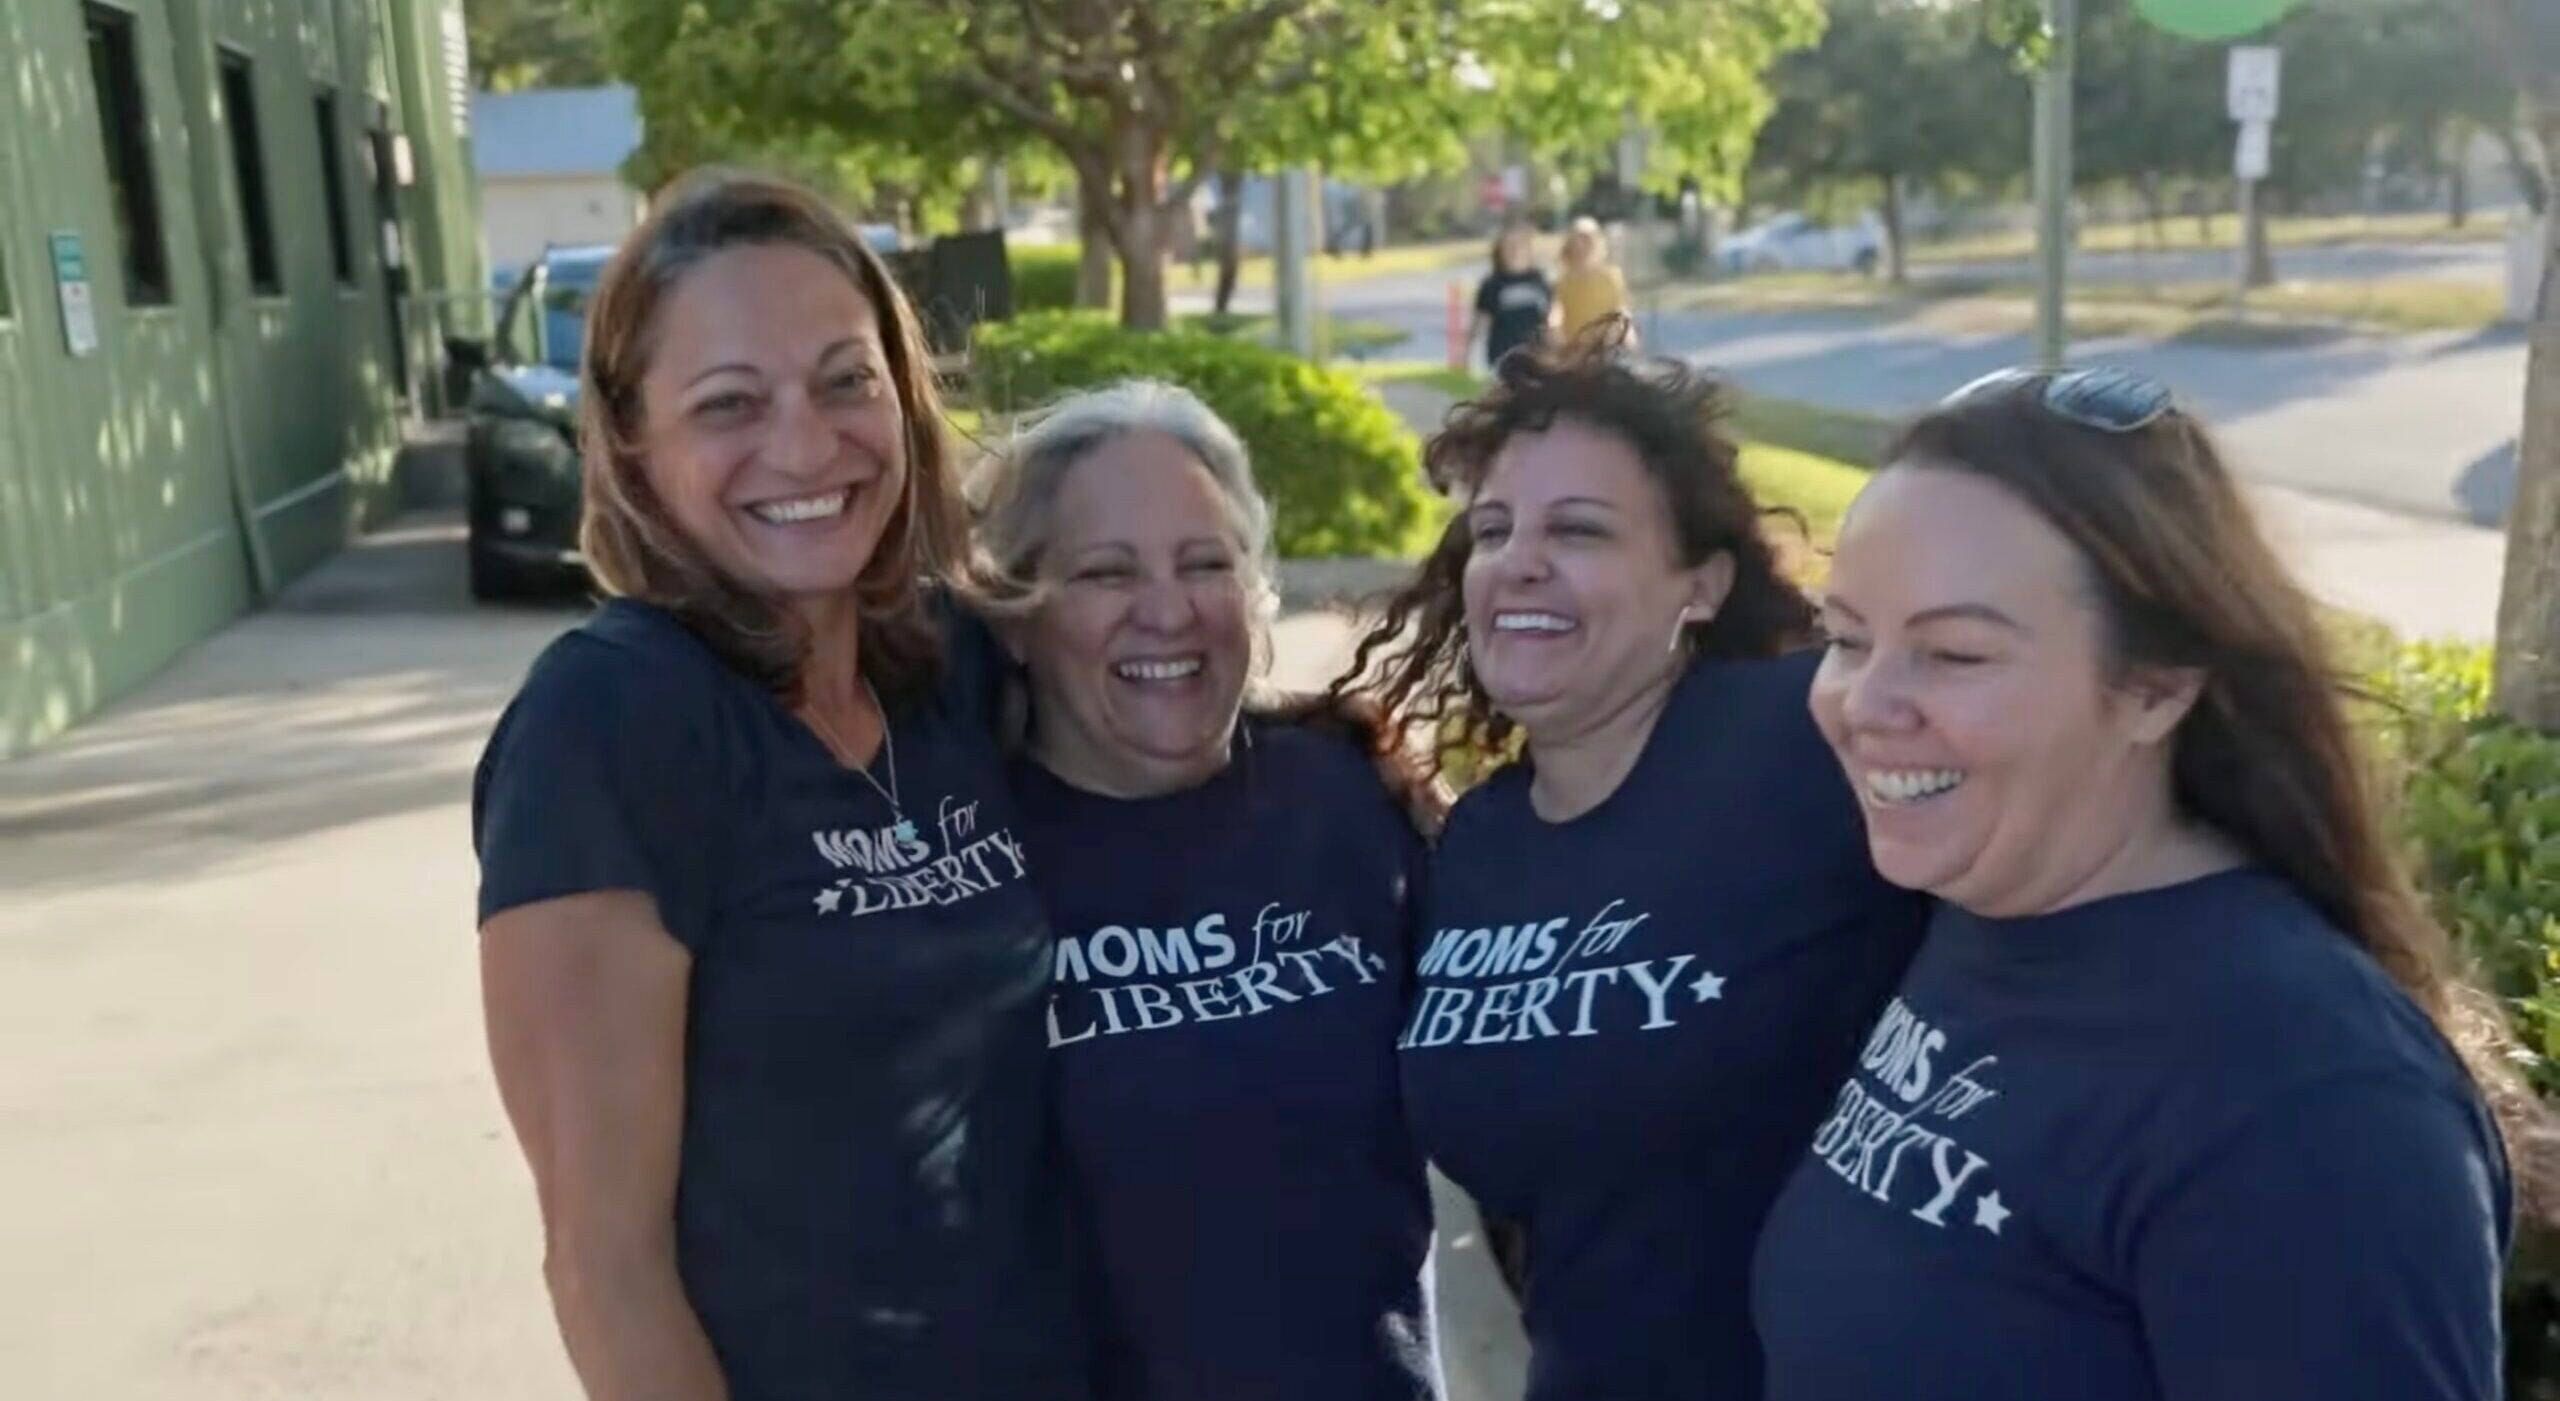 A group of Moms for Liberty members